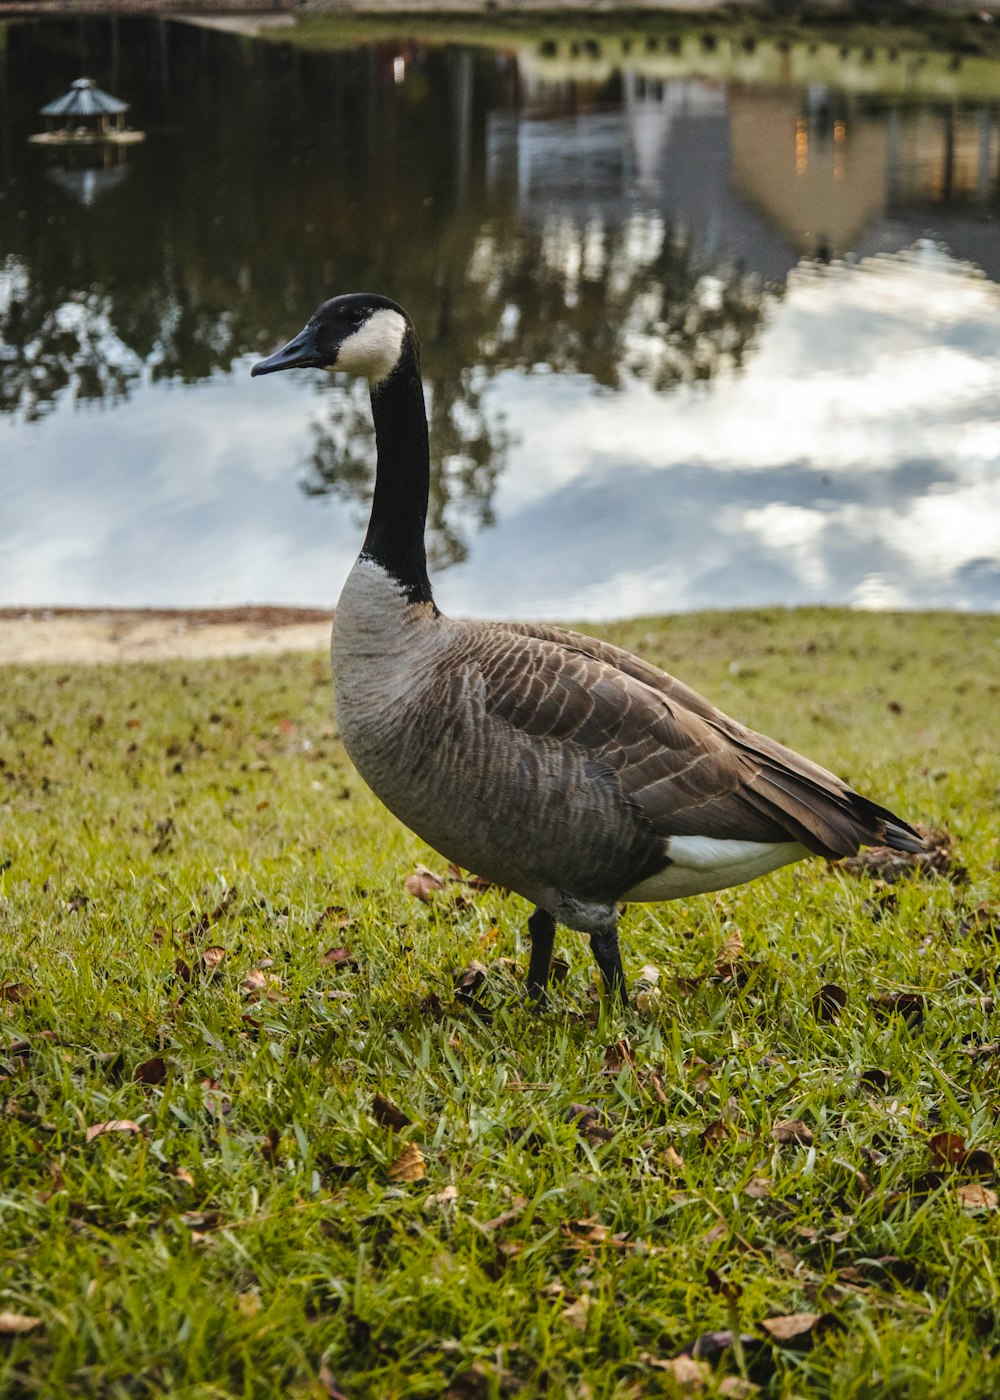 a goose standing in the grass near a pond